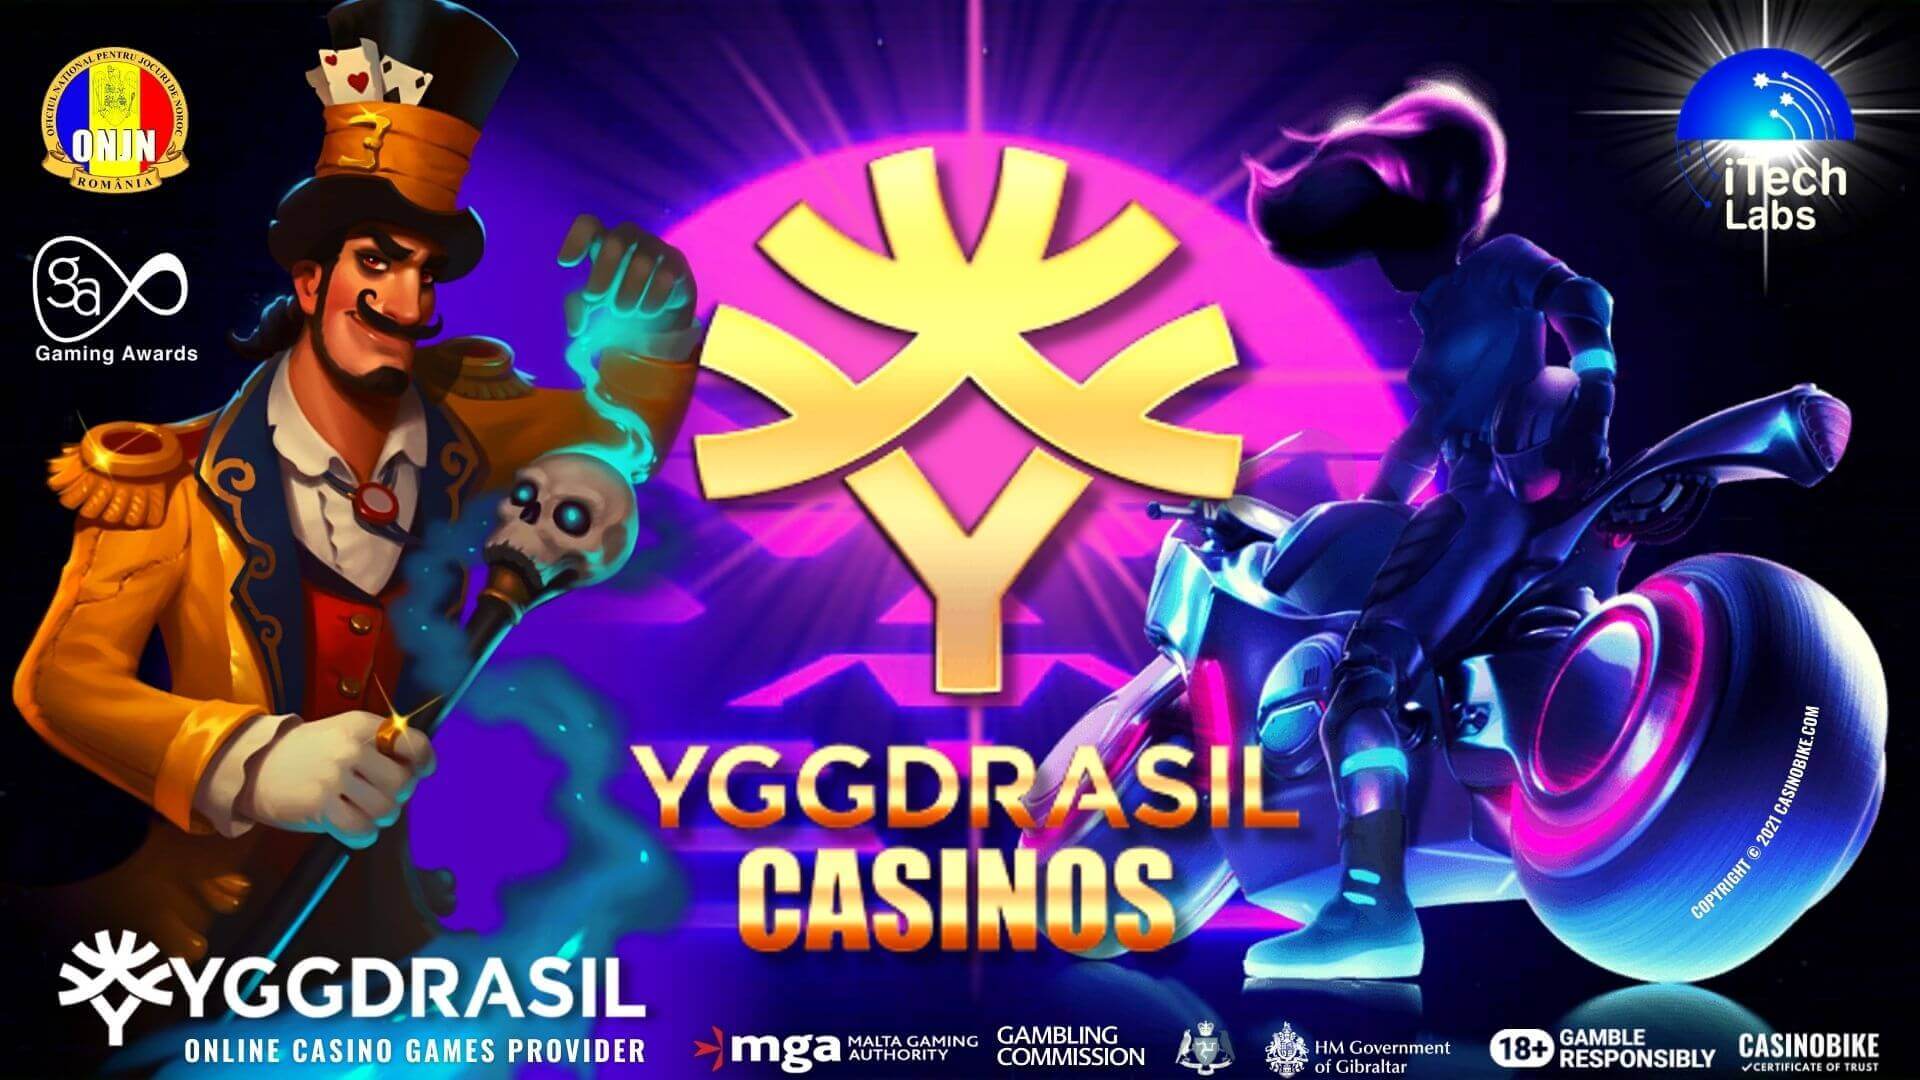 Yggdrasil Gaming Online Casino Software Review